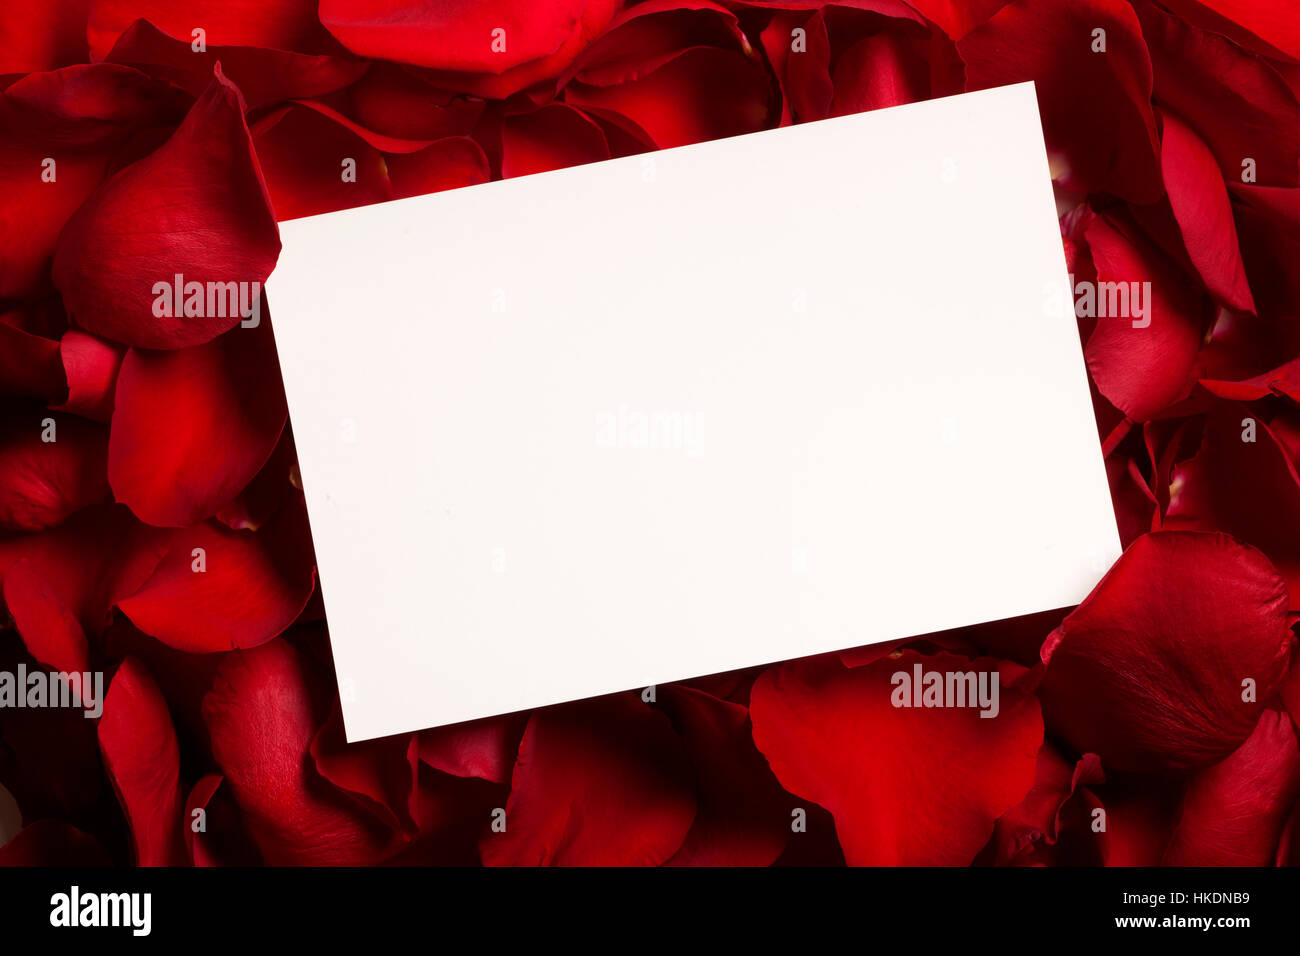 Card on a bed of red rose petals Stock Photo